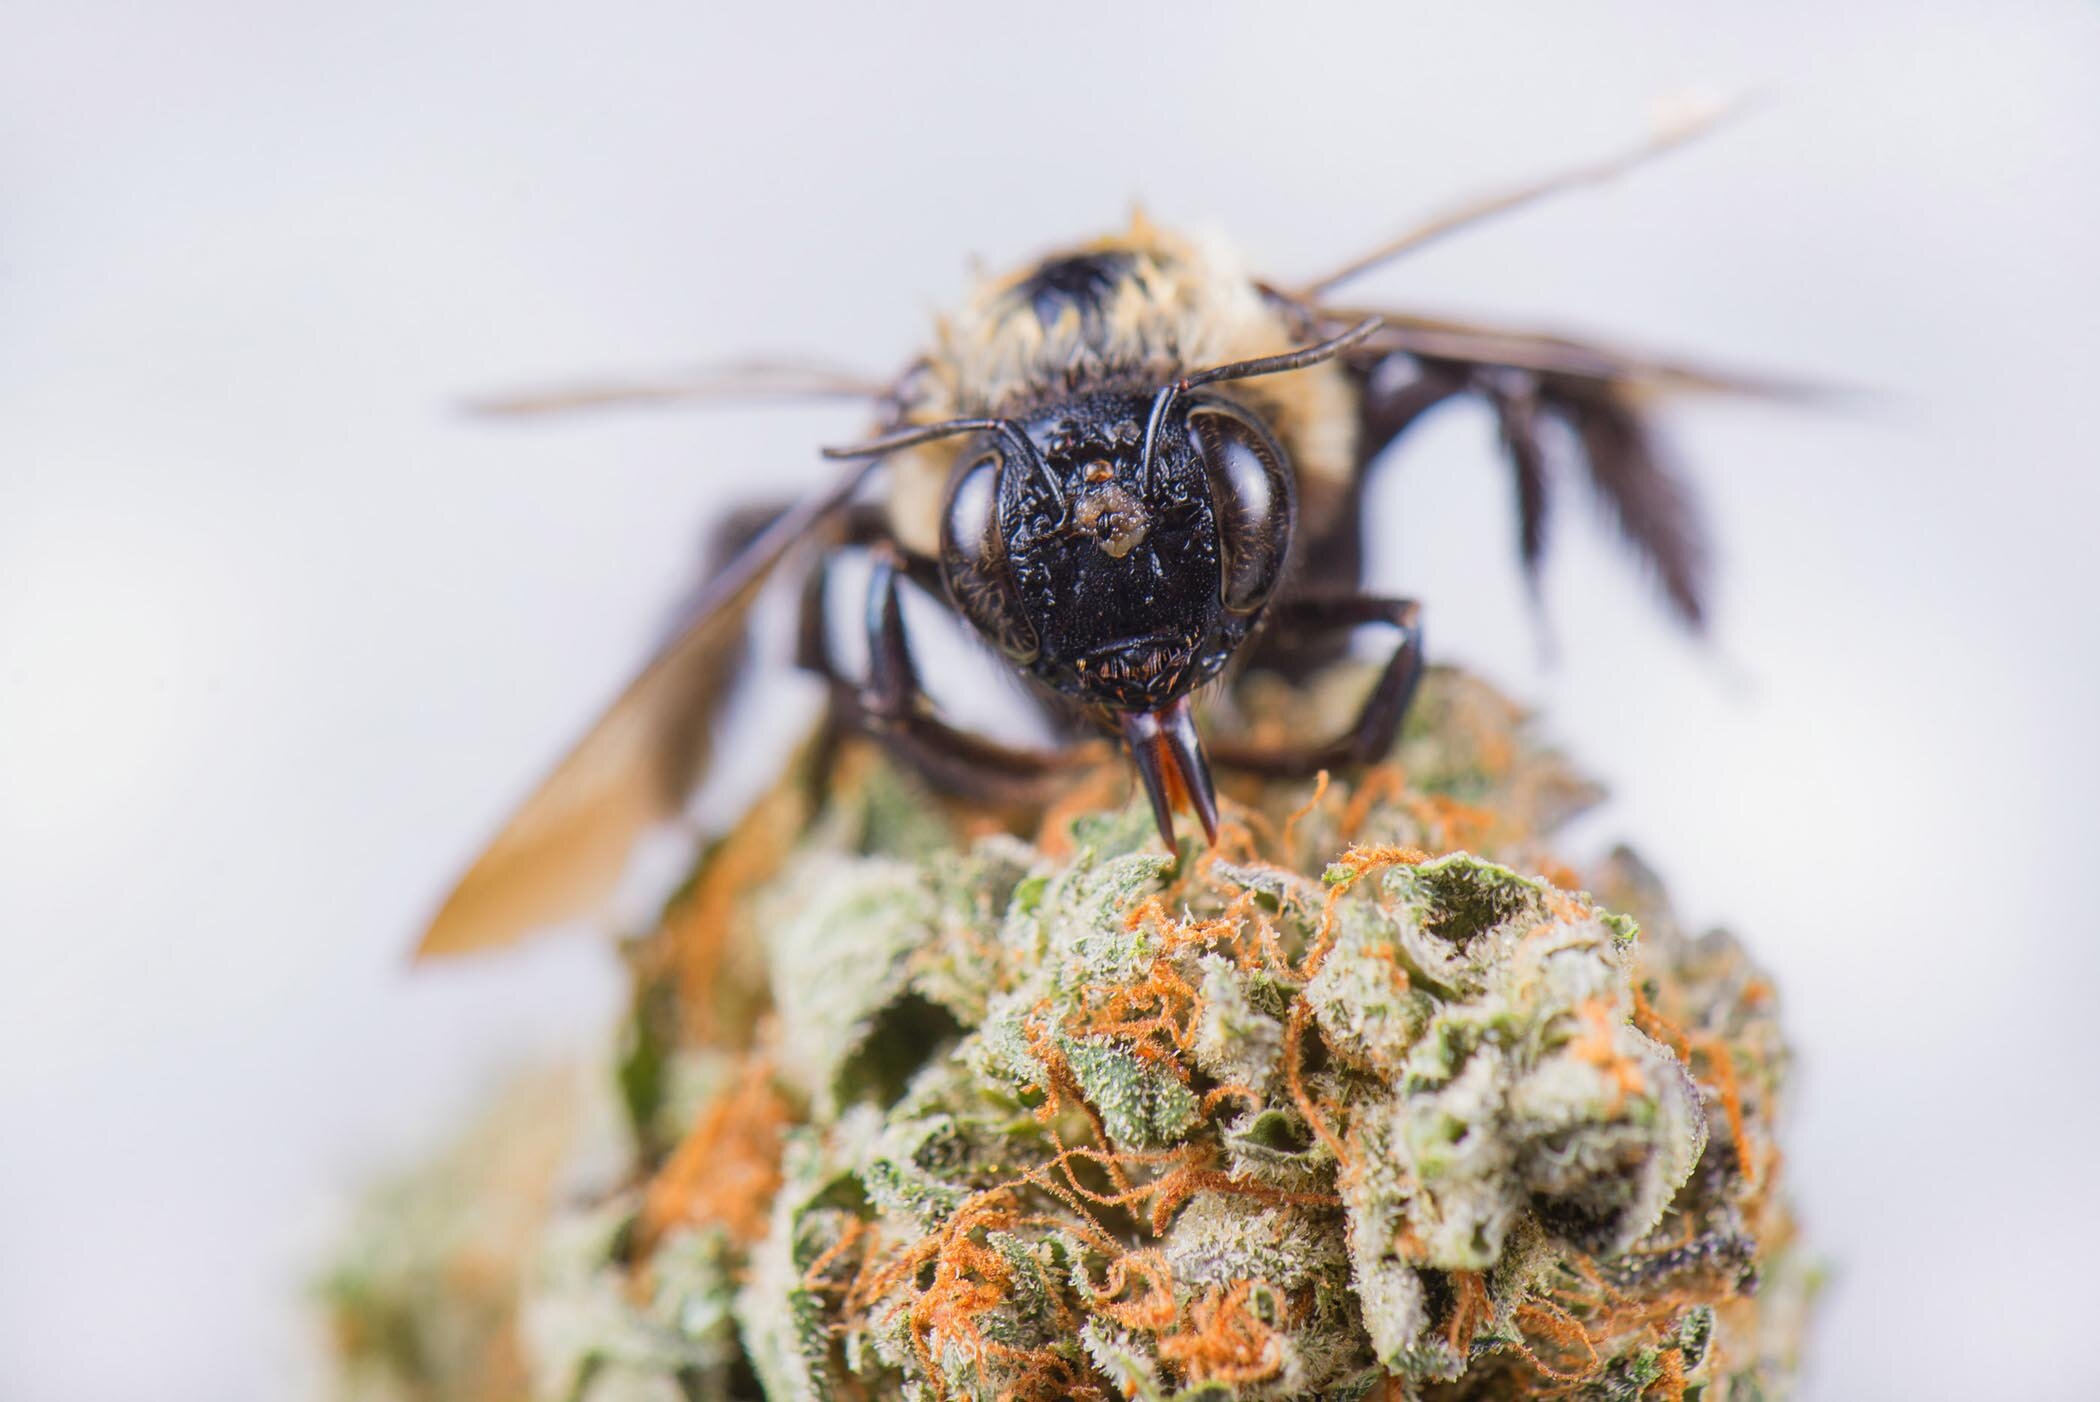 Login, Log in, Register, my account page - lost-password-Registration -Sign in - Contest Login - Macro detail of a bee over dried cannabis nug isolated over white background - medical marijuana concept